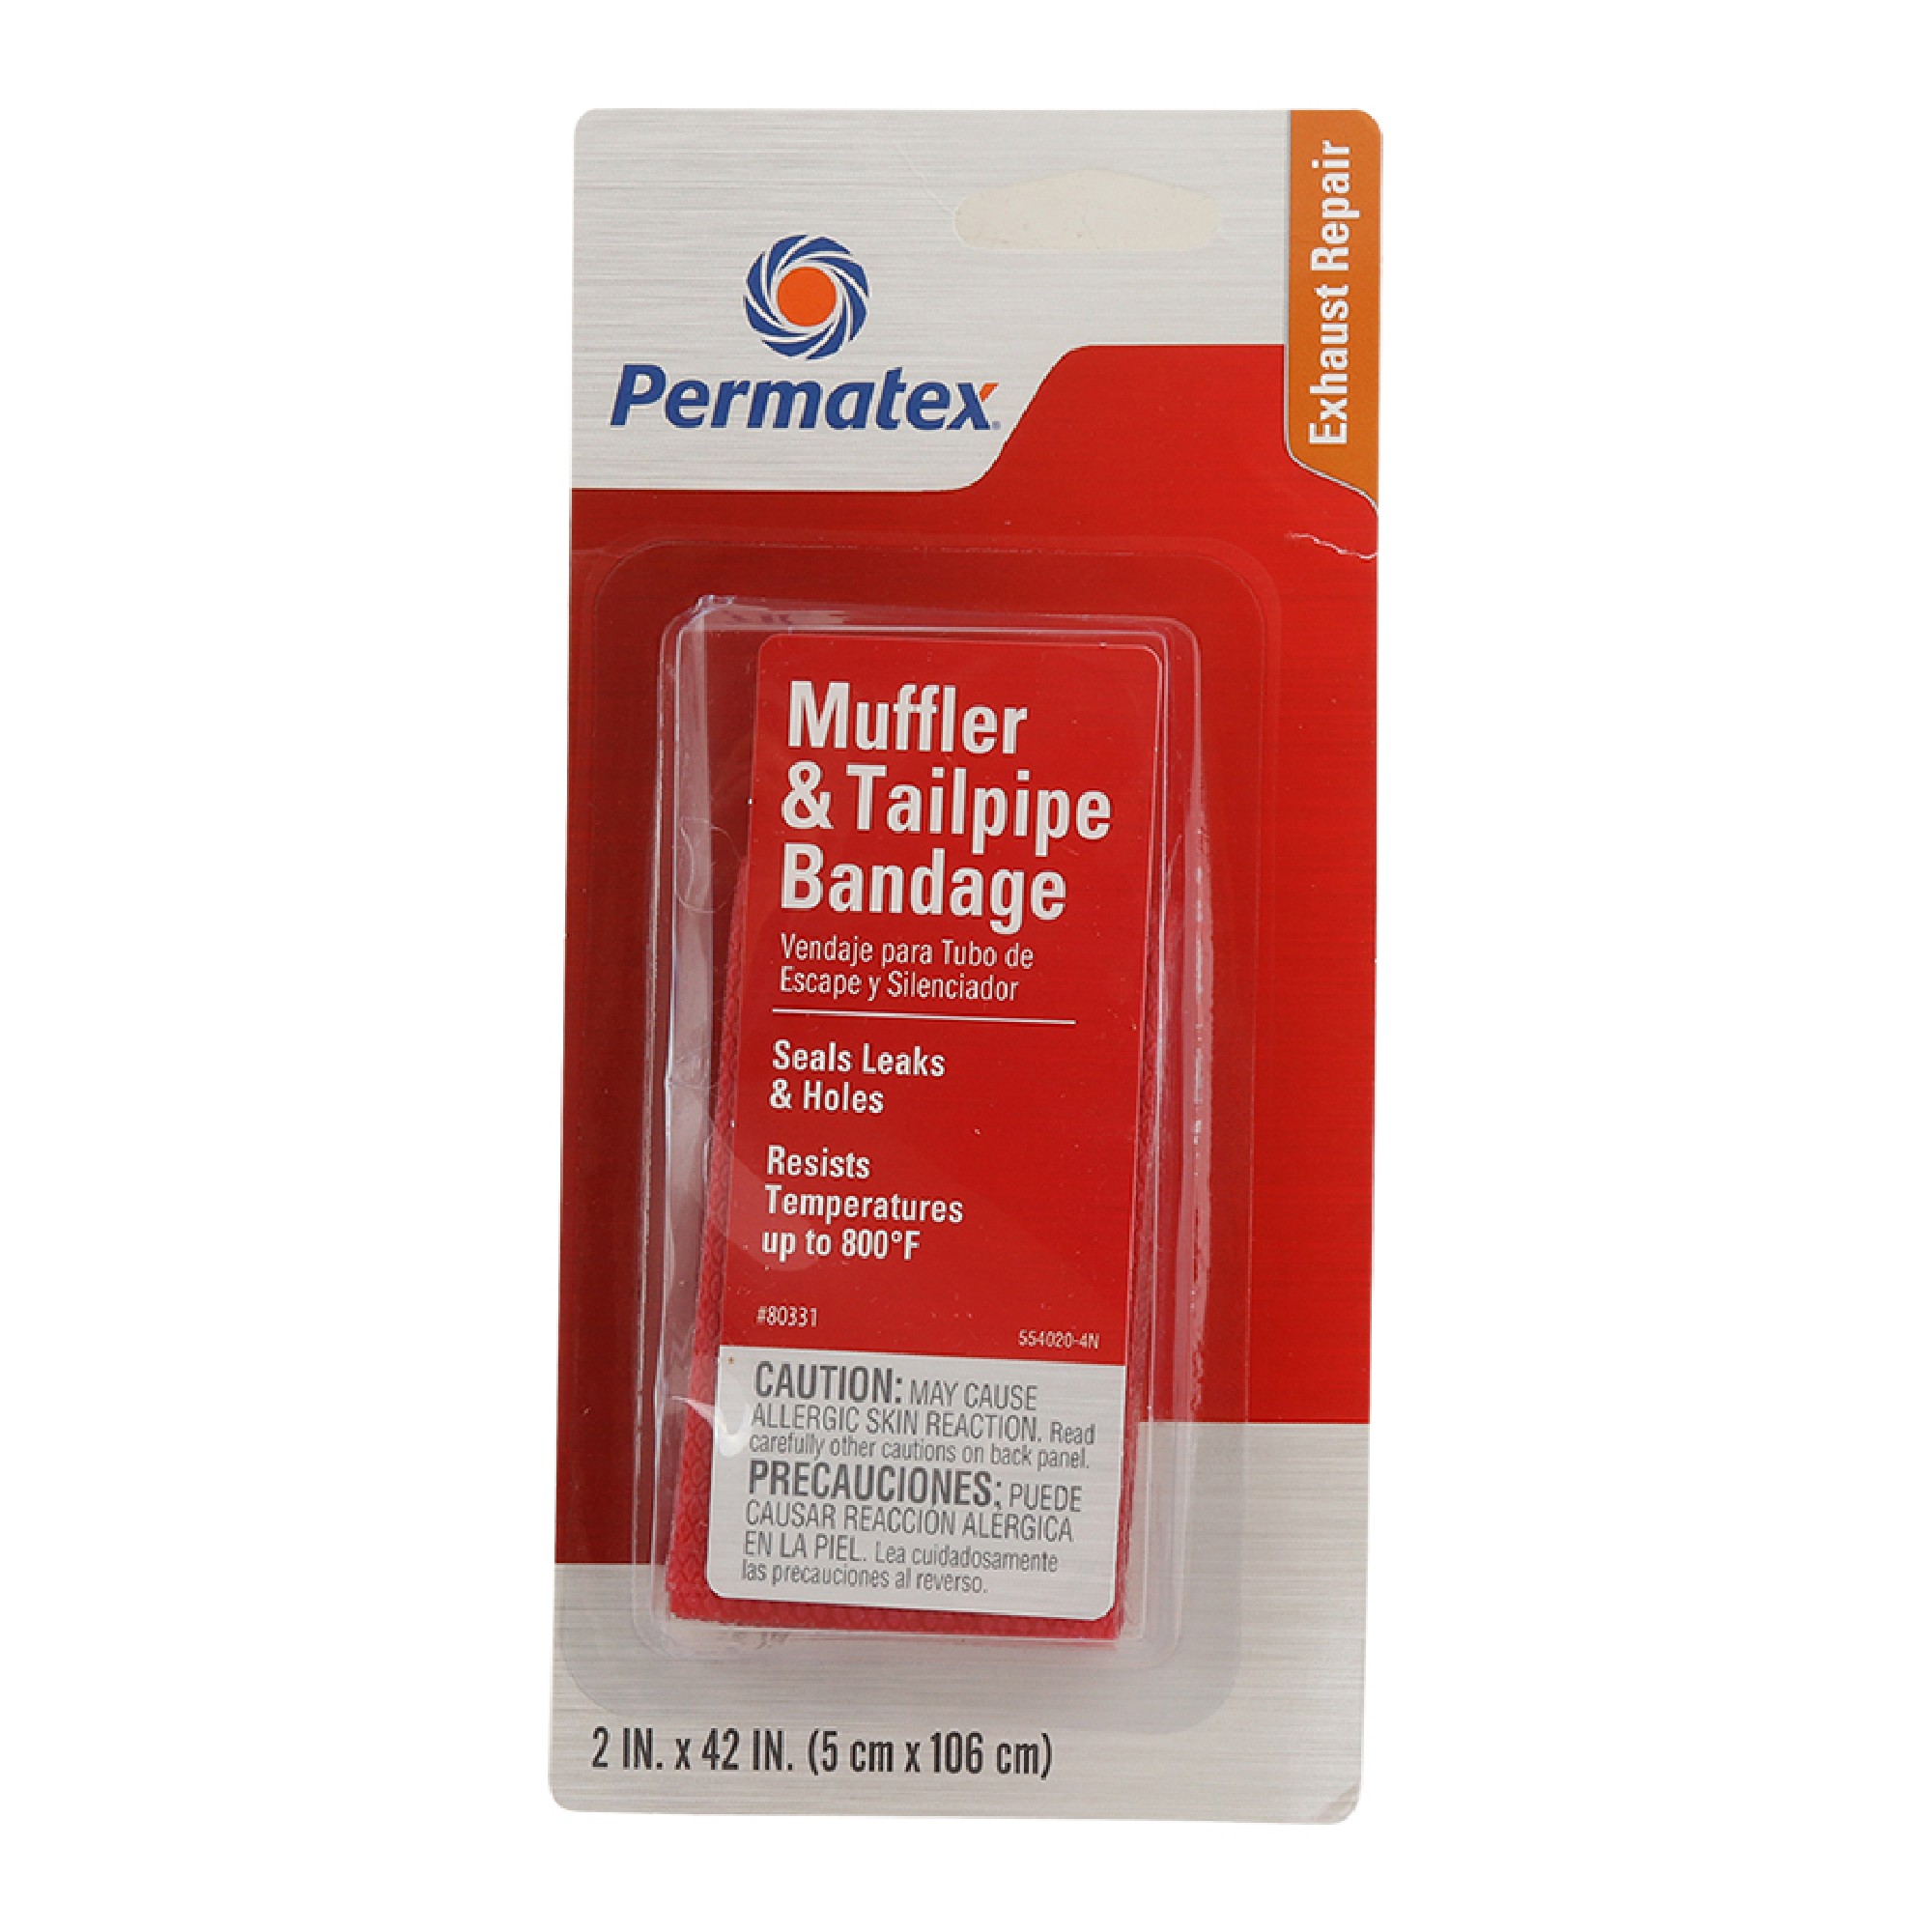 Complete Tractor Muffler Bandage for Universal 80331